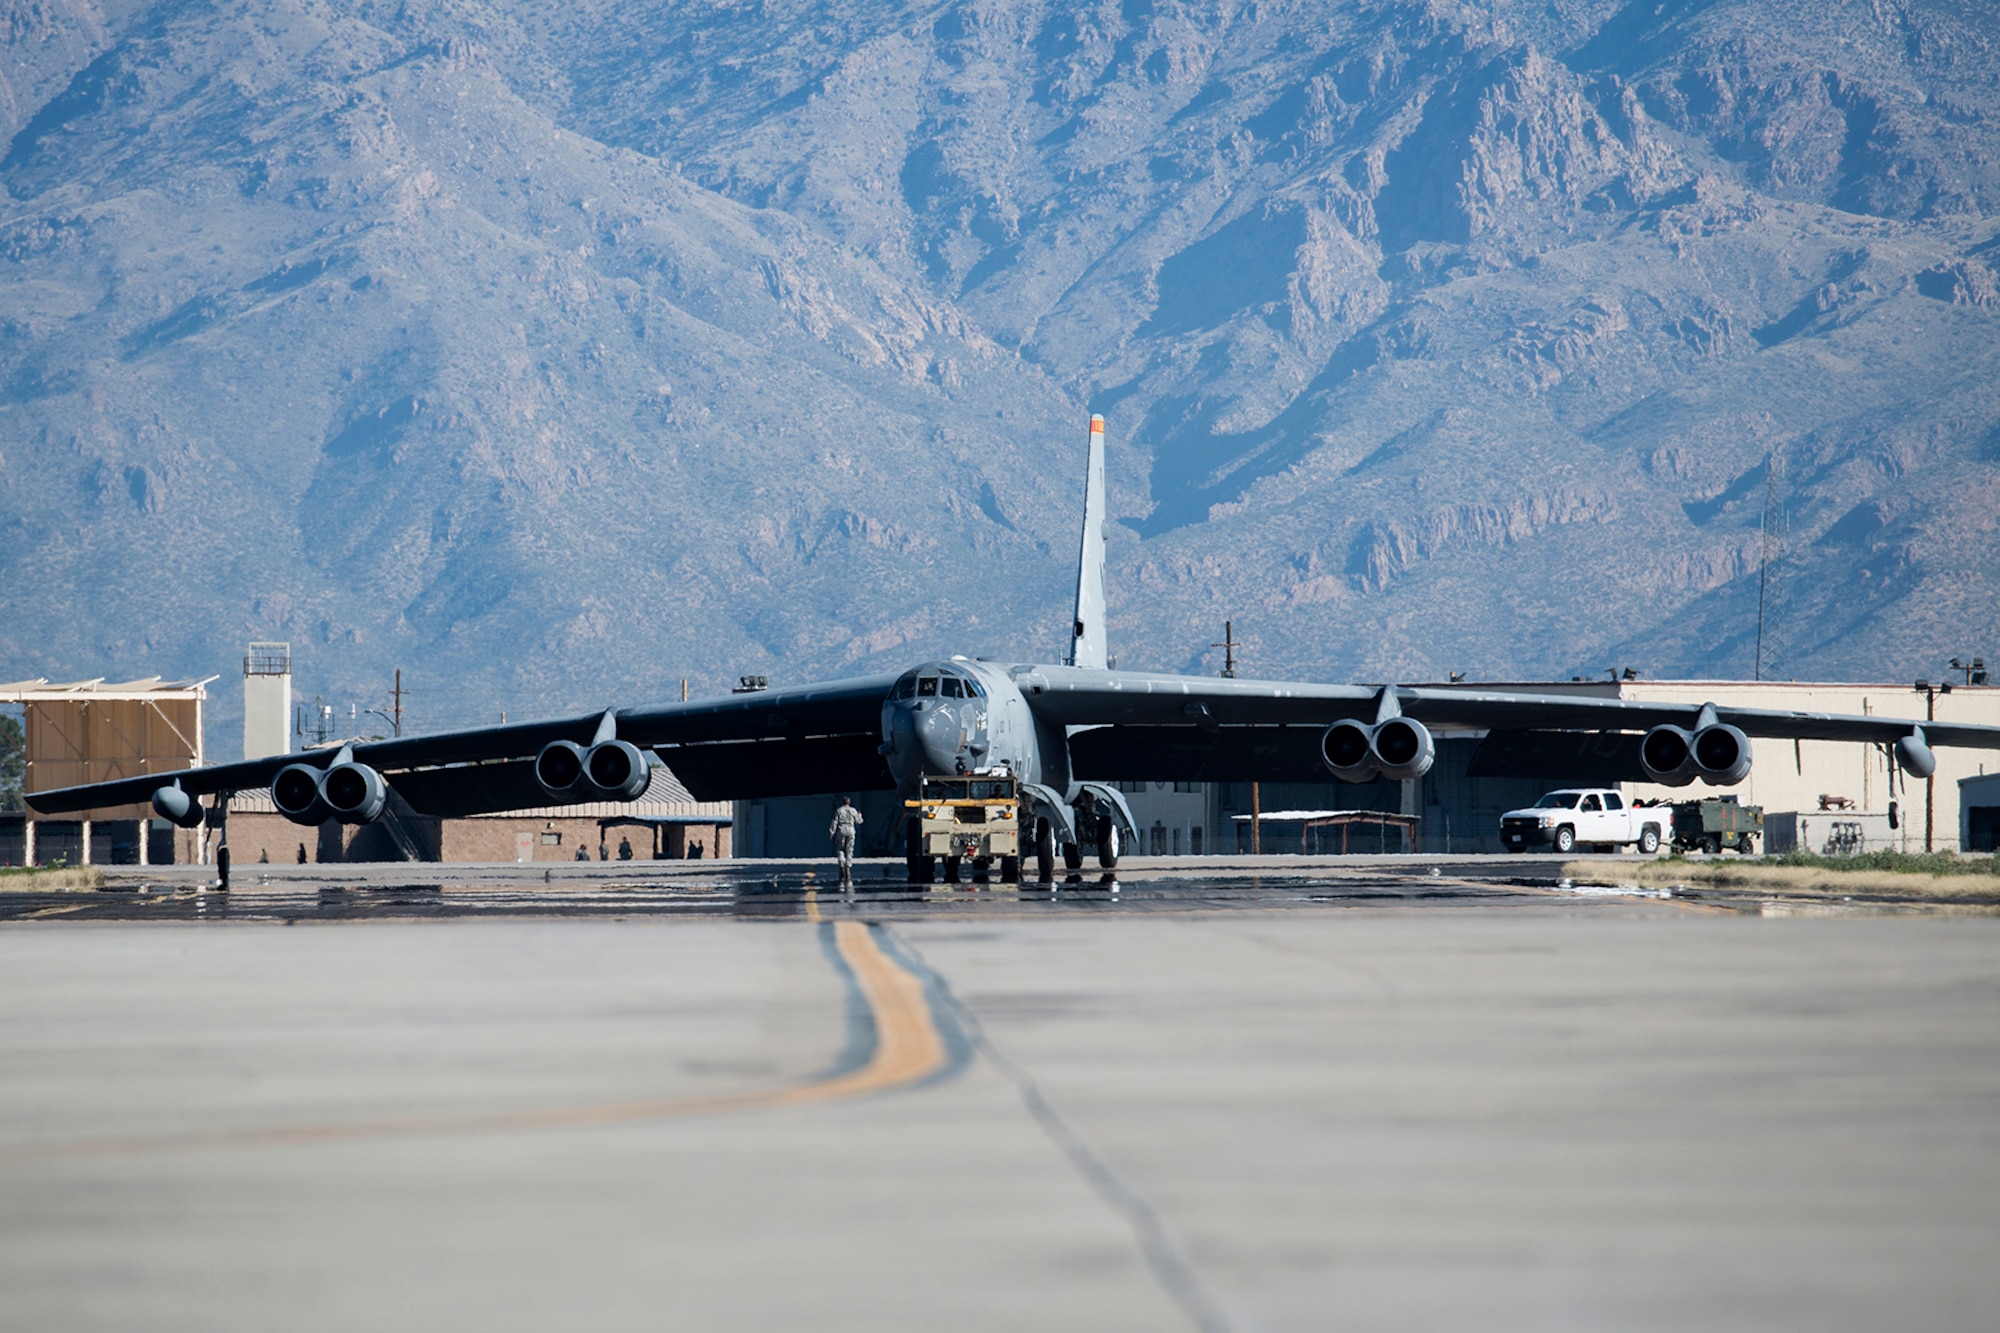 A U.S. Air Force B-52 Stratofortress is towed from a maintenance area at the 309th Aerospace Maintenance and Regeneration Group, Feb. 11, 2015, Davis-Monthan Air Force Base, Ariz. The aircraft, tail number 61-1007 and known as the "Ghost Rider", is being regenerated for active service after sitting in storage since 2008 when it was decommissioned and sent the Boneyard. (U.S. Air Force photo by Master Sgt. Greg Steele/Released)